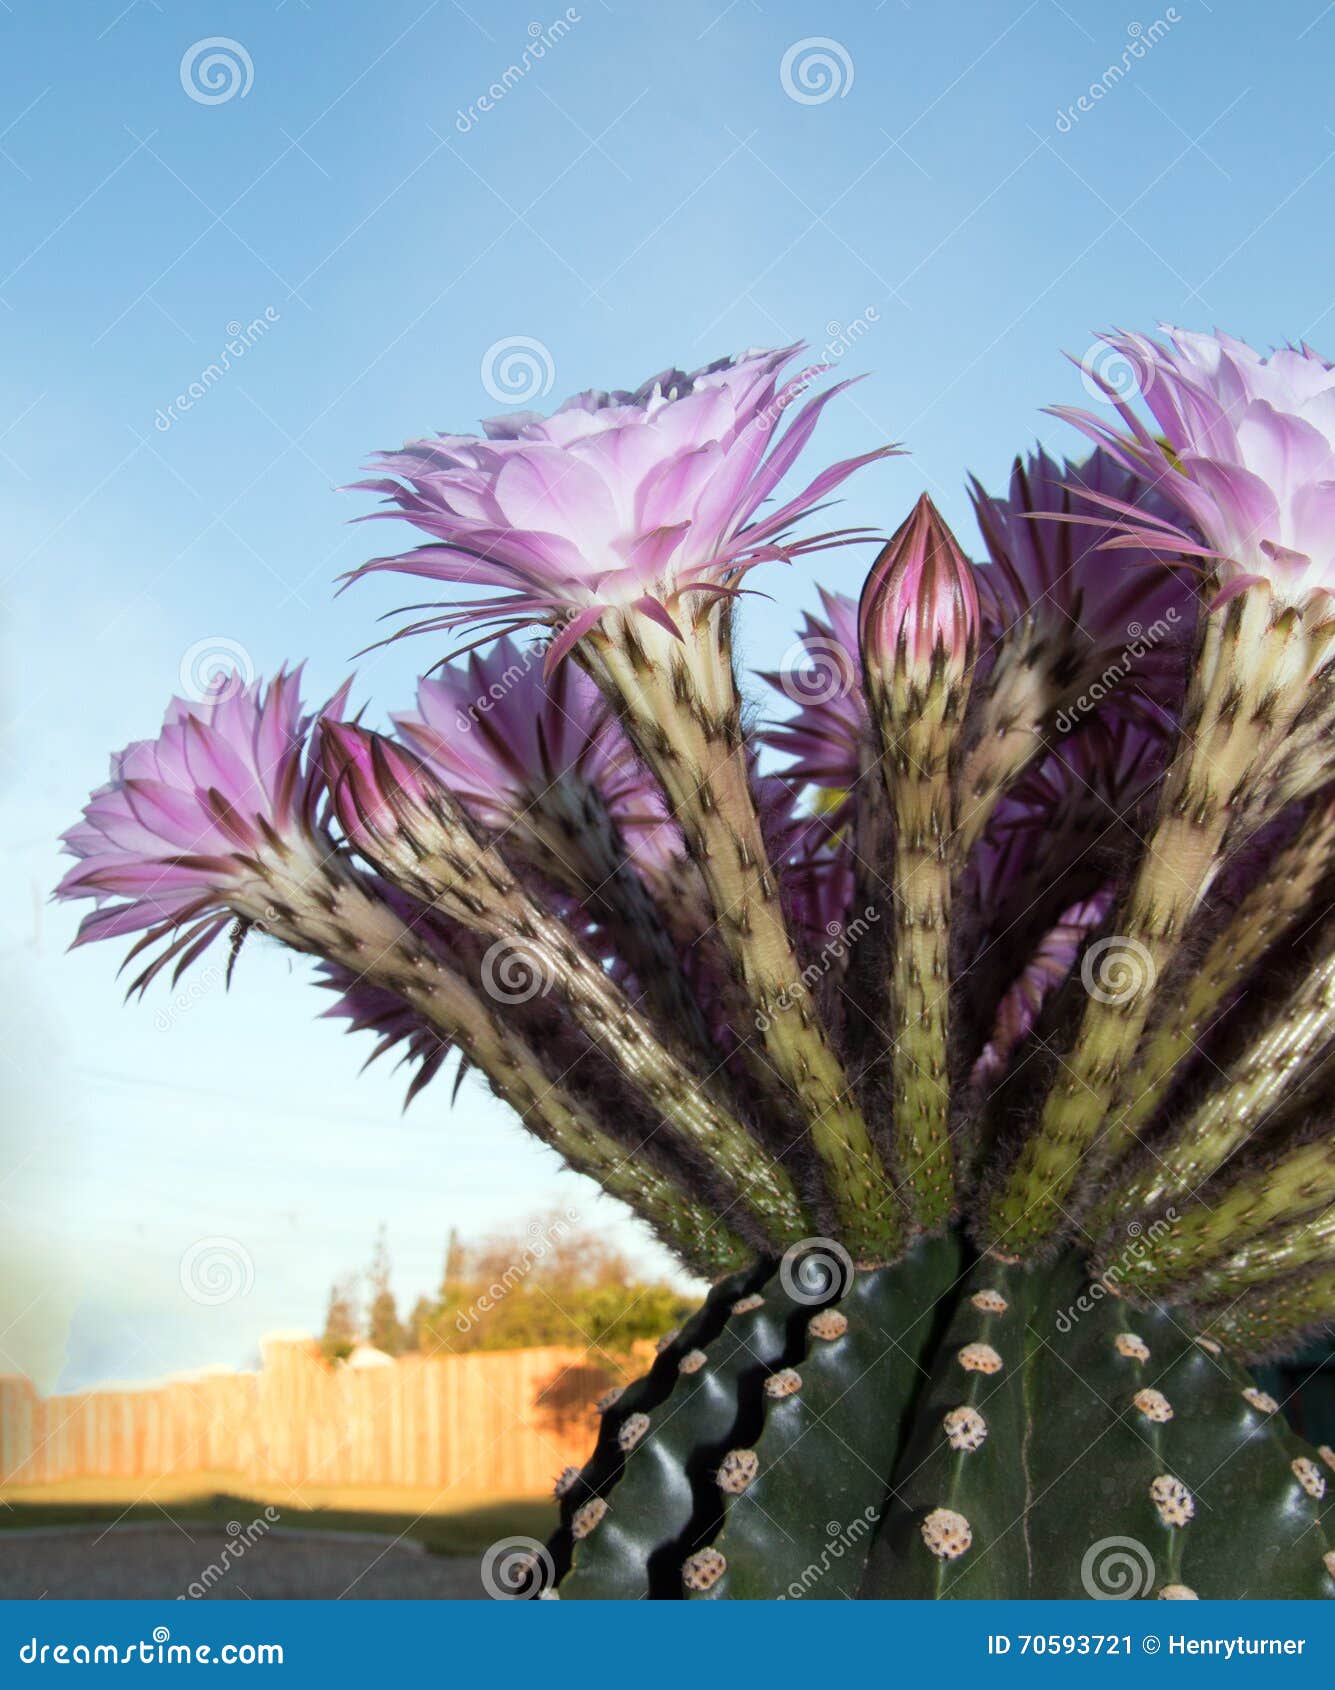 boquet of barrel cactus flowers in the early morning in riverside california